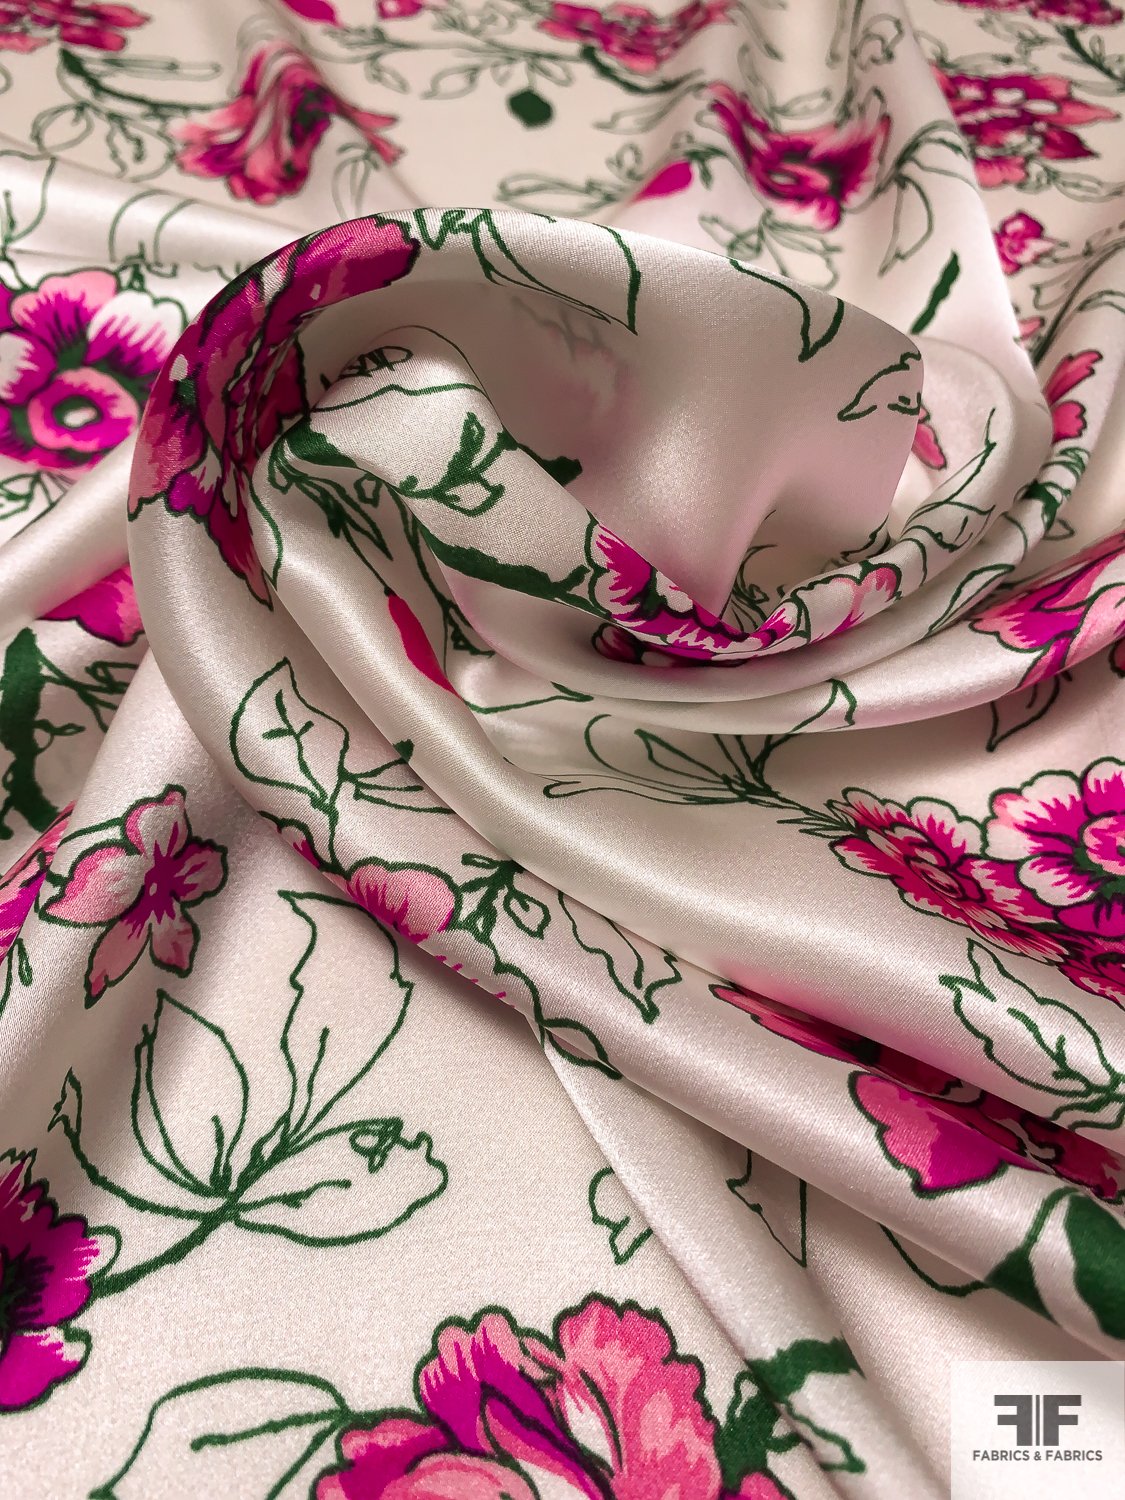 Floral Printed Silk Charmeuse - Magenta / Evergreen / Off-White